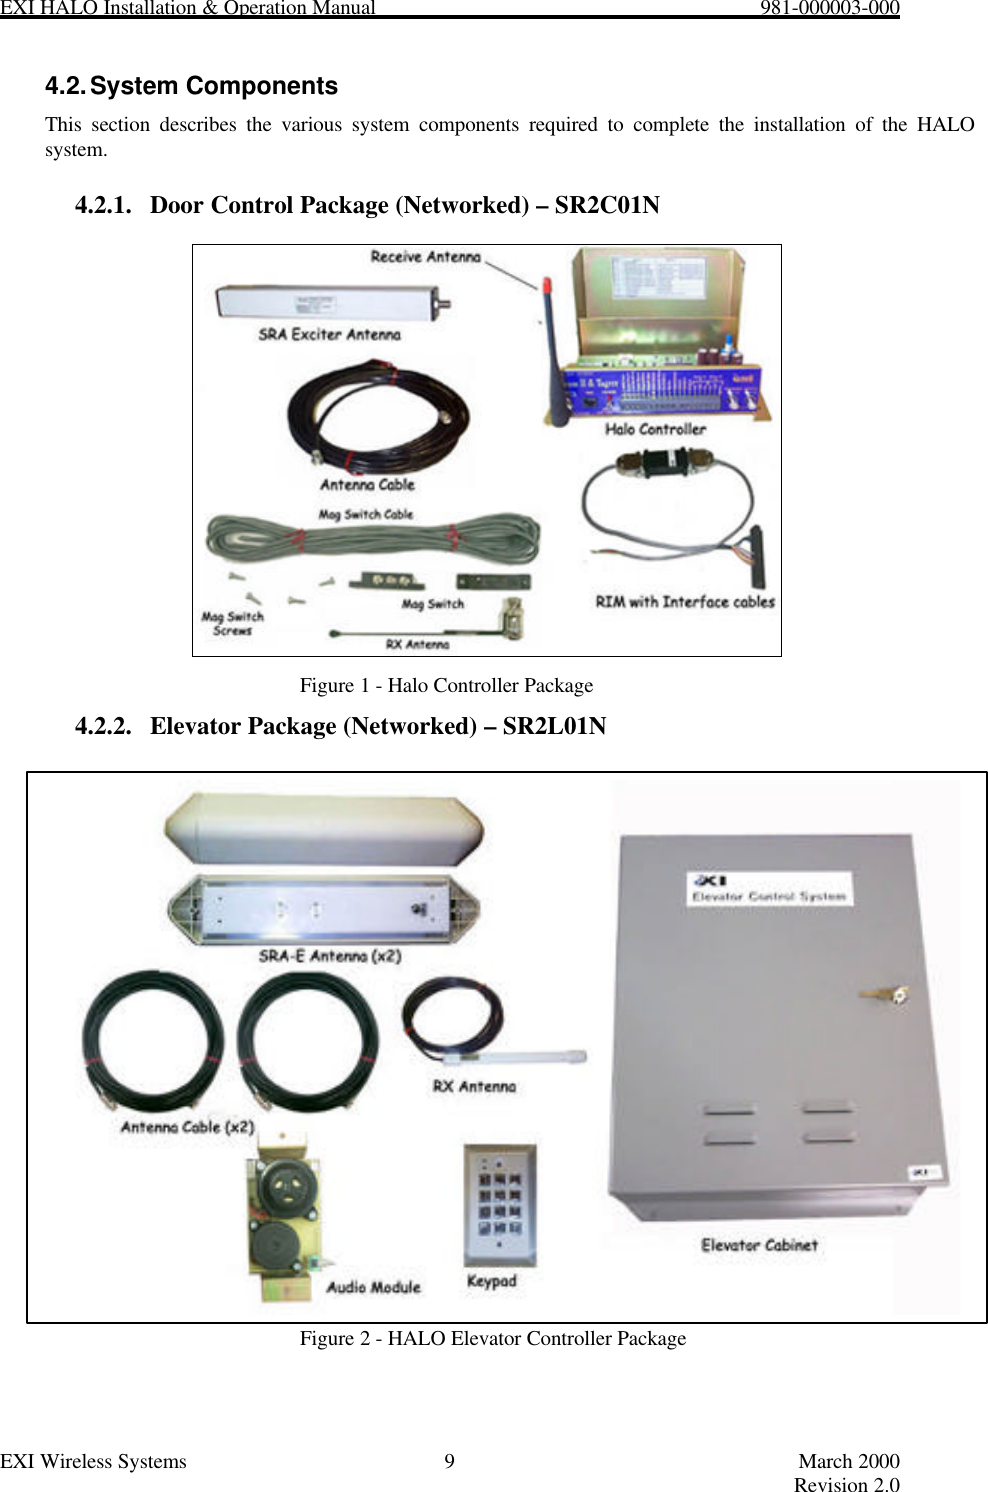 EXI HALO Installation &amp; Operation Manual                                                            981-000003-000EXI Wireless Systems 9March 2000Revision 2.04.2. System ComponentsThis section describes the various system components required to complete the installation of the HALOsystem.4.2.1. Door Control Package (Networked) – SR2C01NFigure 1 - Halo Controller Package4.2.2. Elevator Package (Networked) – SR2L01NFigure 2 - HALO Elevator Controller Package